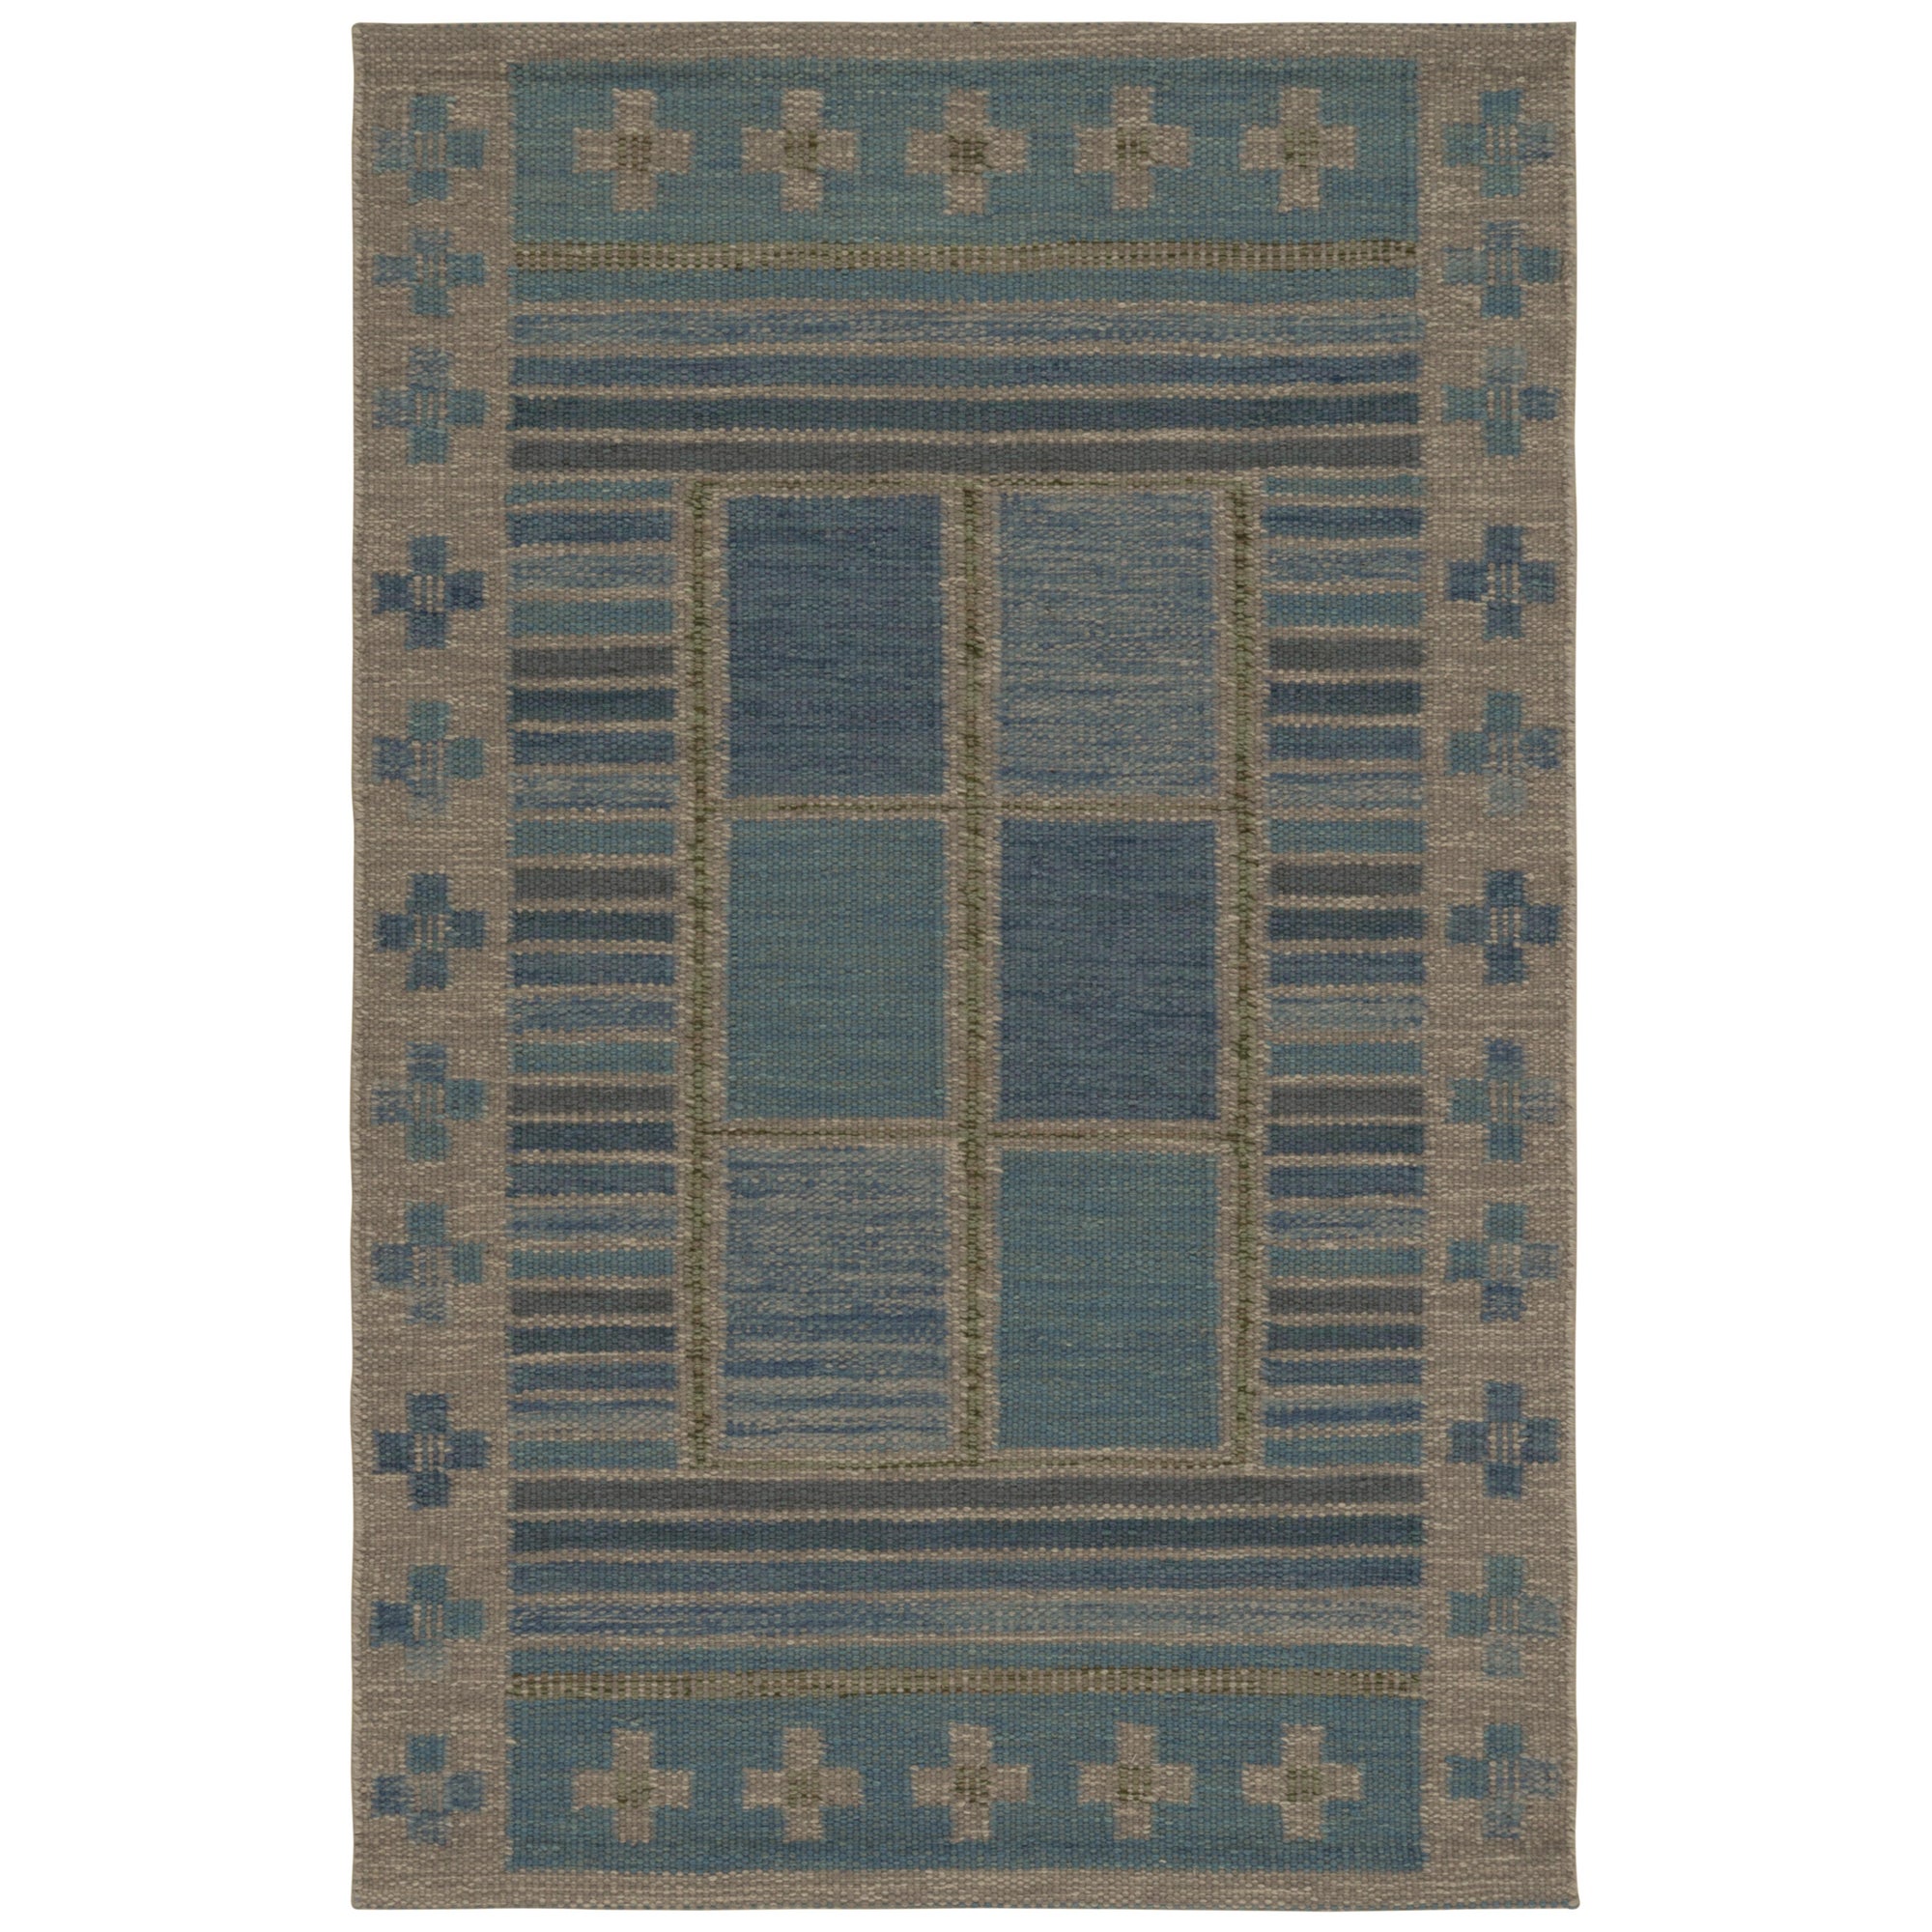 Rug & Kilim’s Scandinavian Style Rug in Blue, with Colorful Geometric Patterns